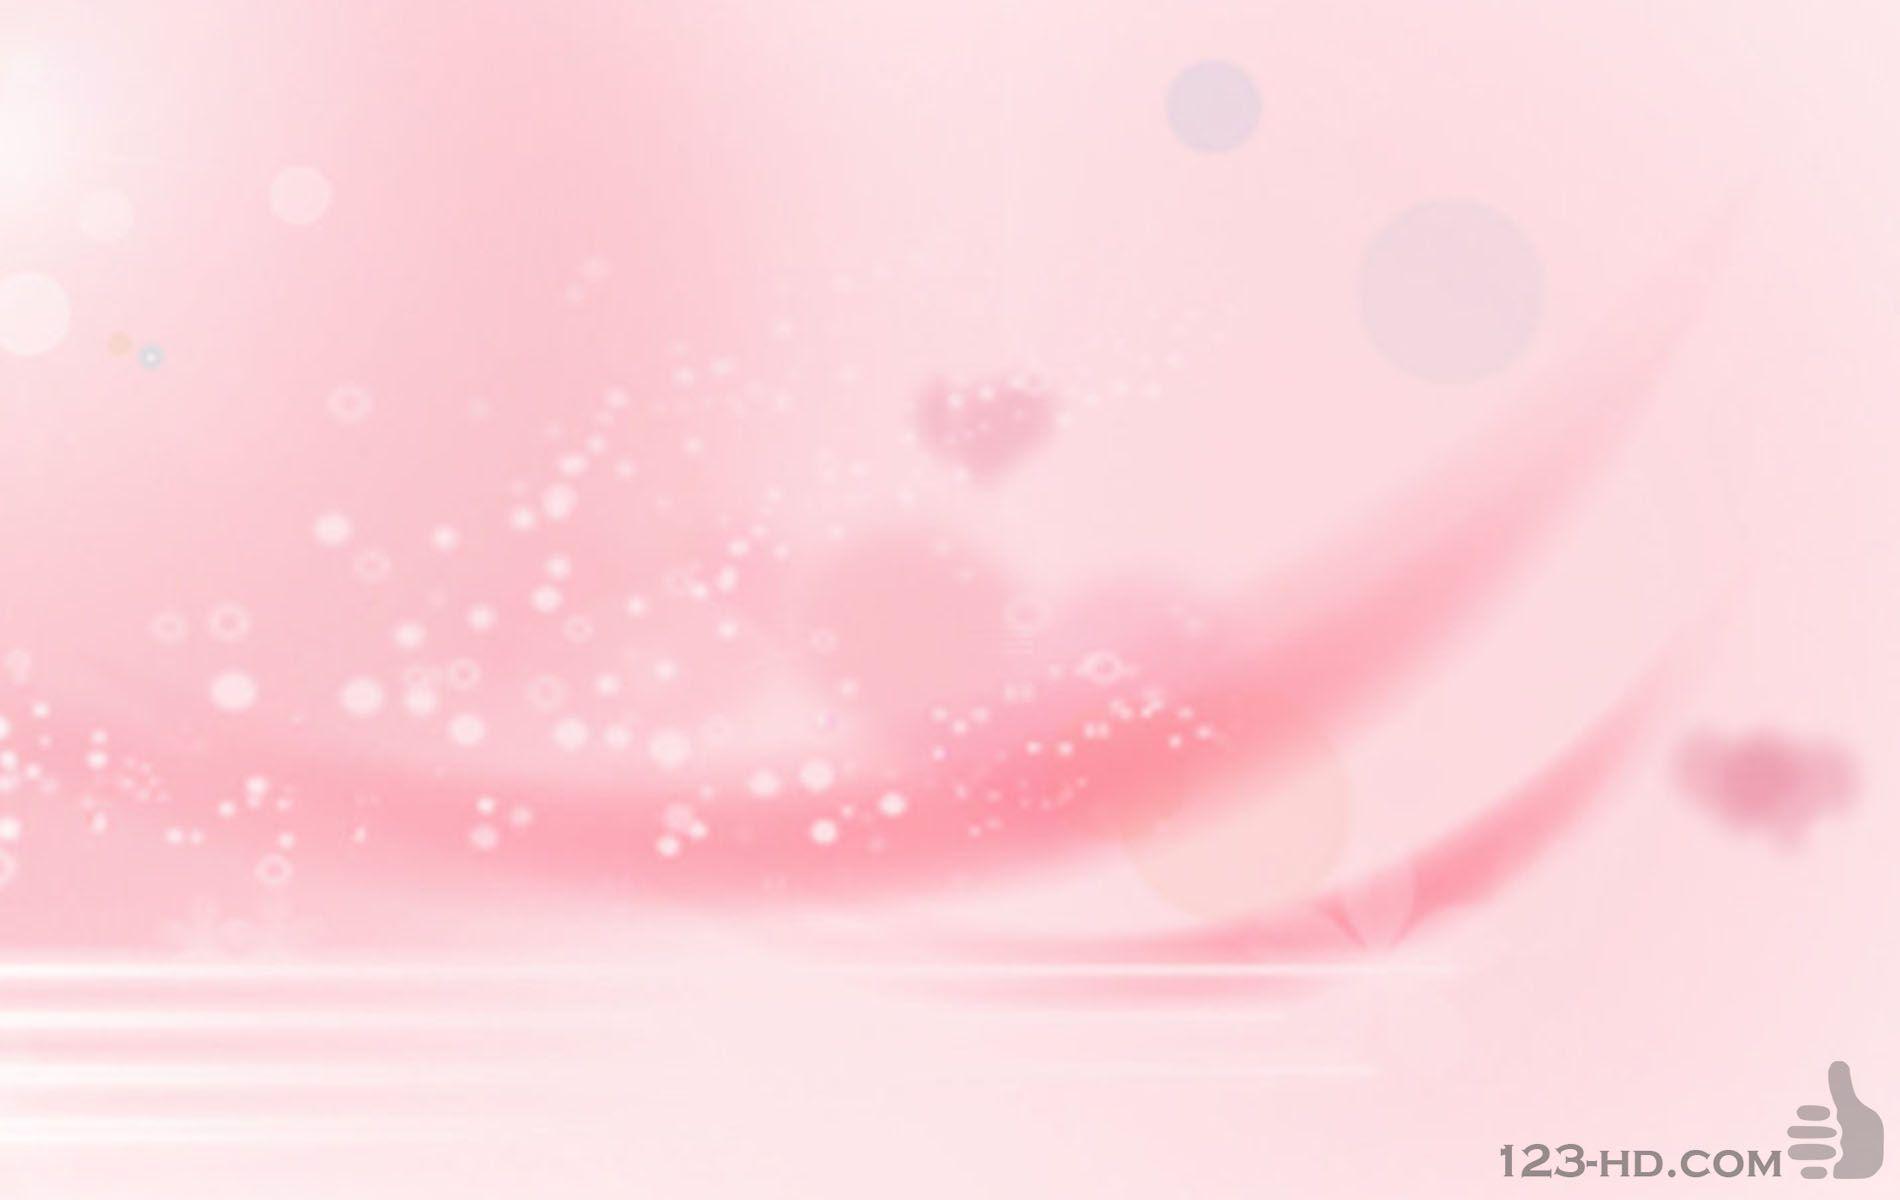 light pink background wallpaper Search Engine